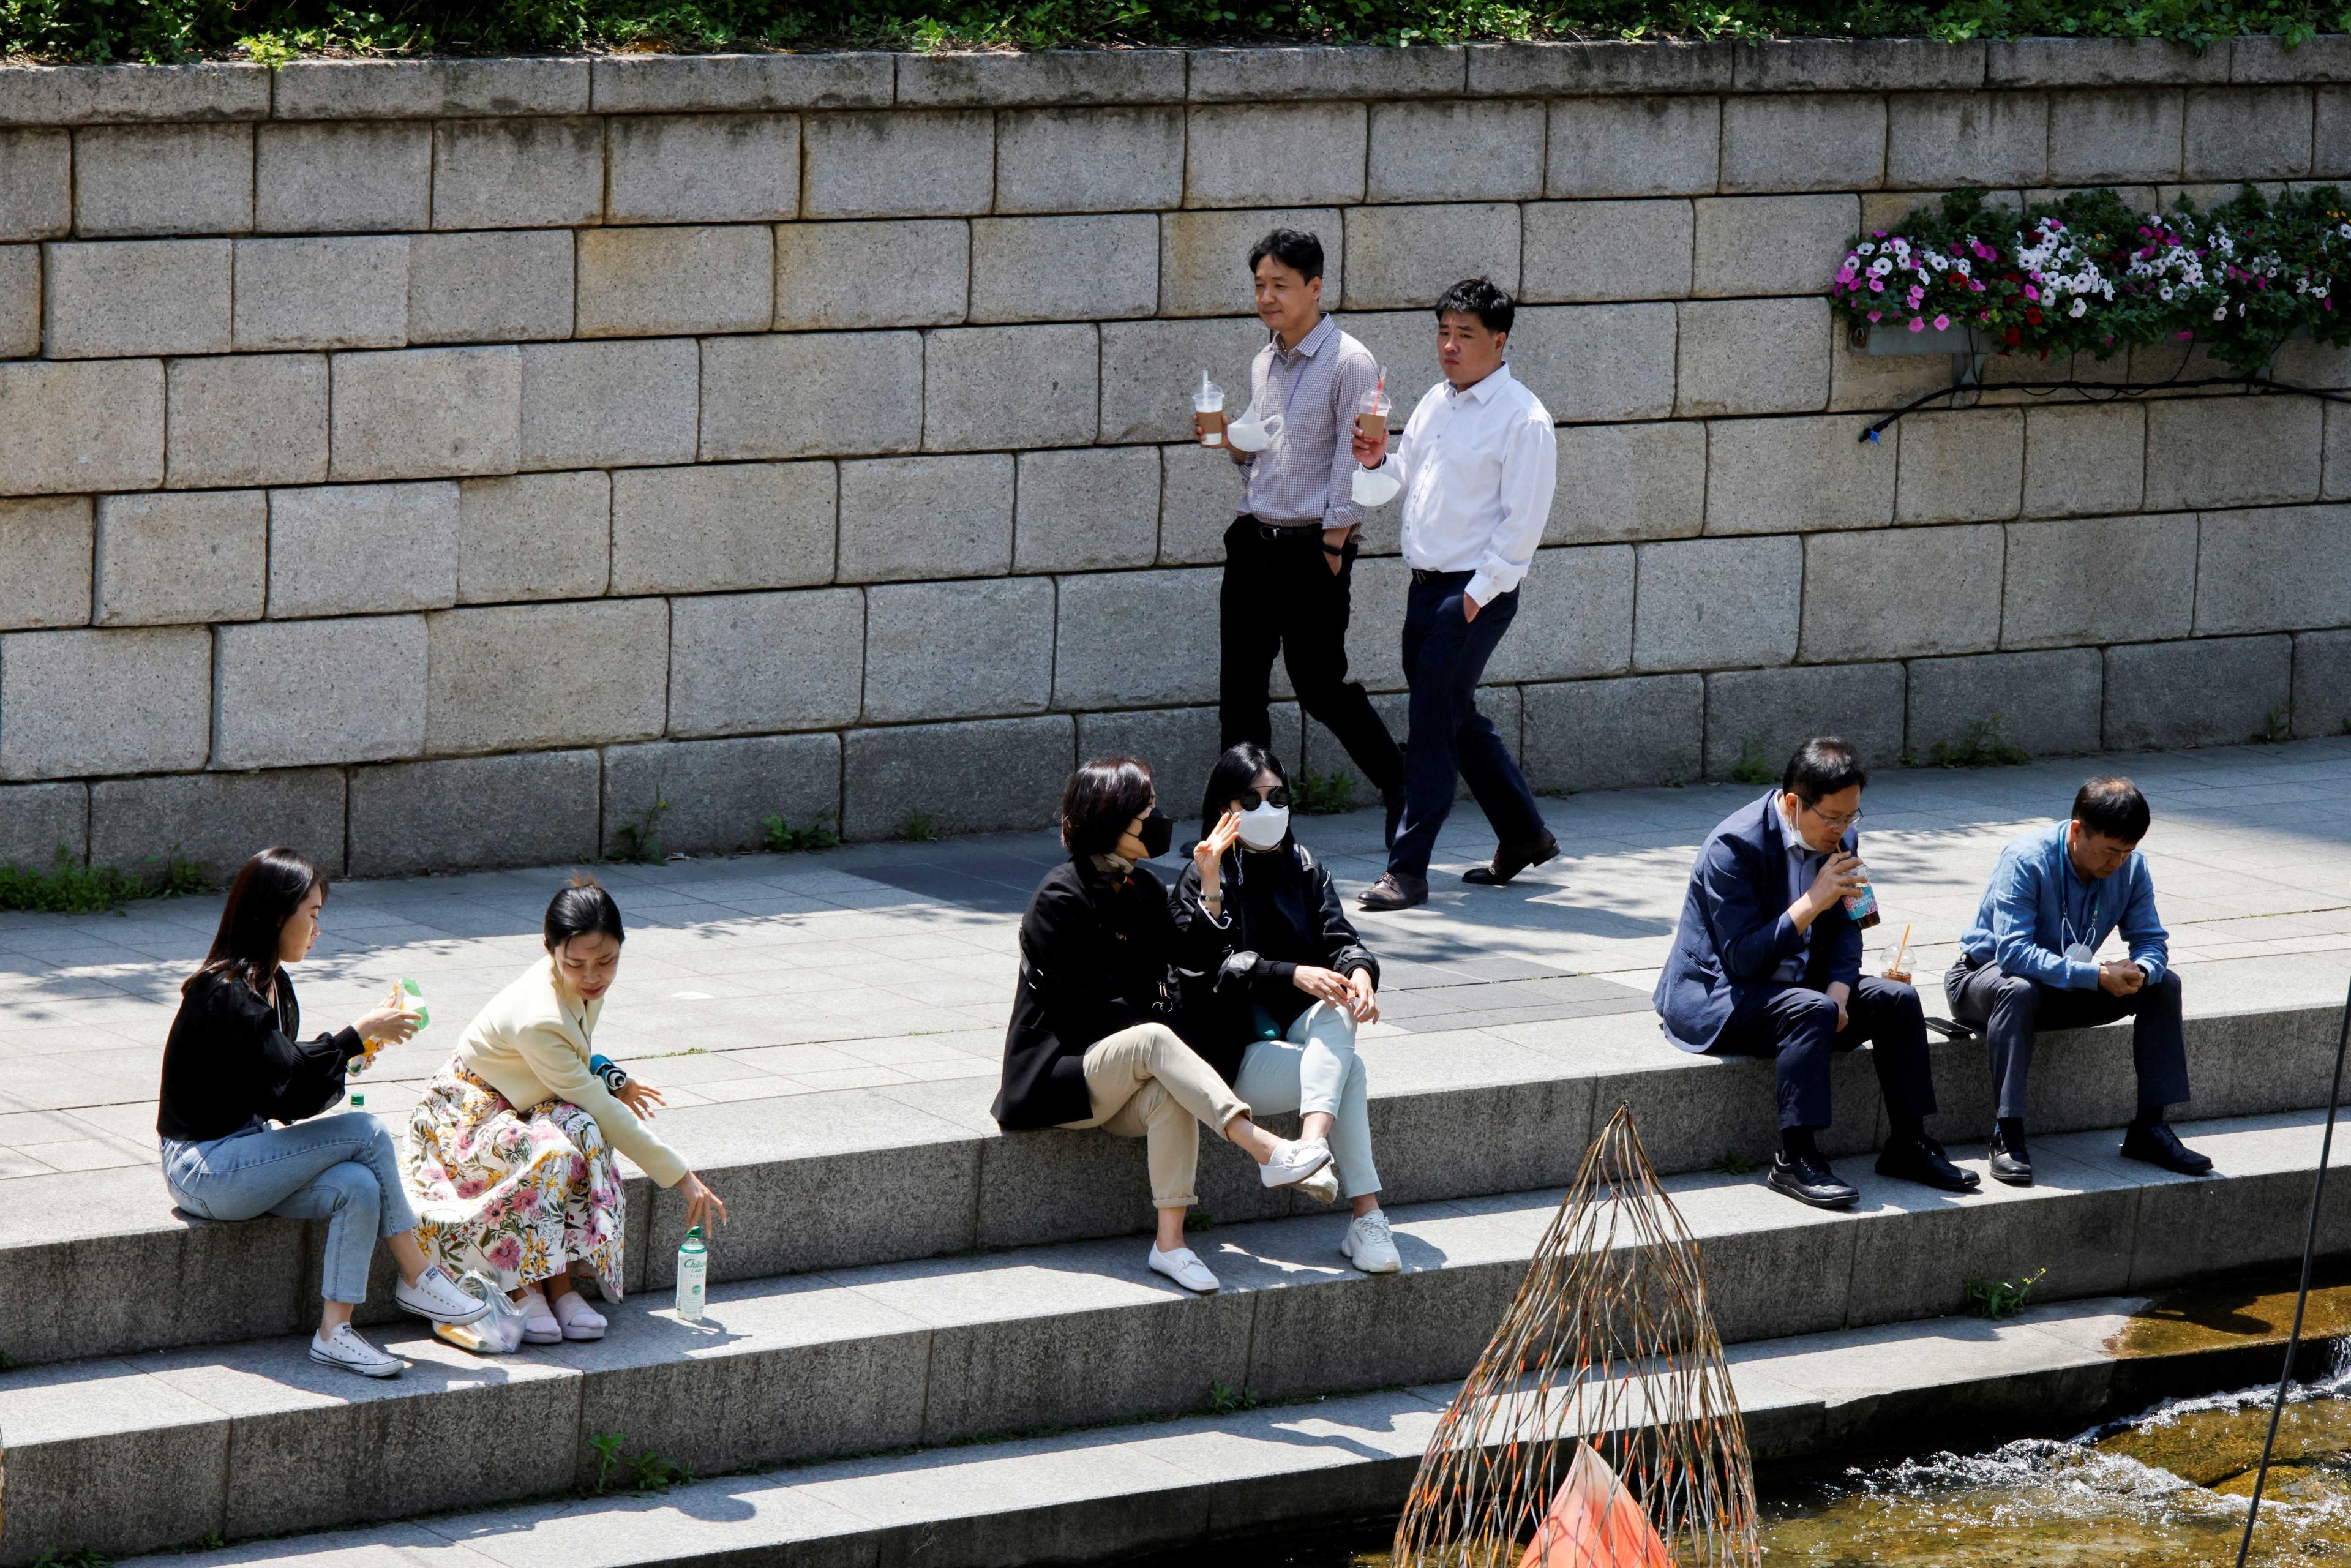 People walk on a sunny spring day in Seoul, South Korea, May 3, 2022. Photo: Reuters